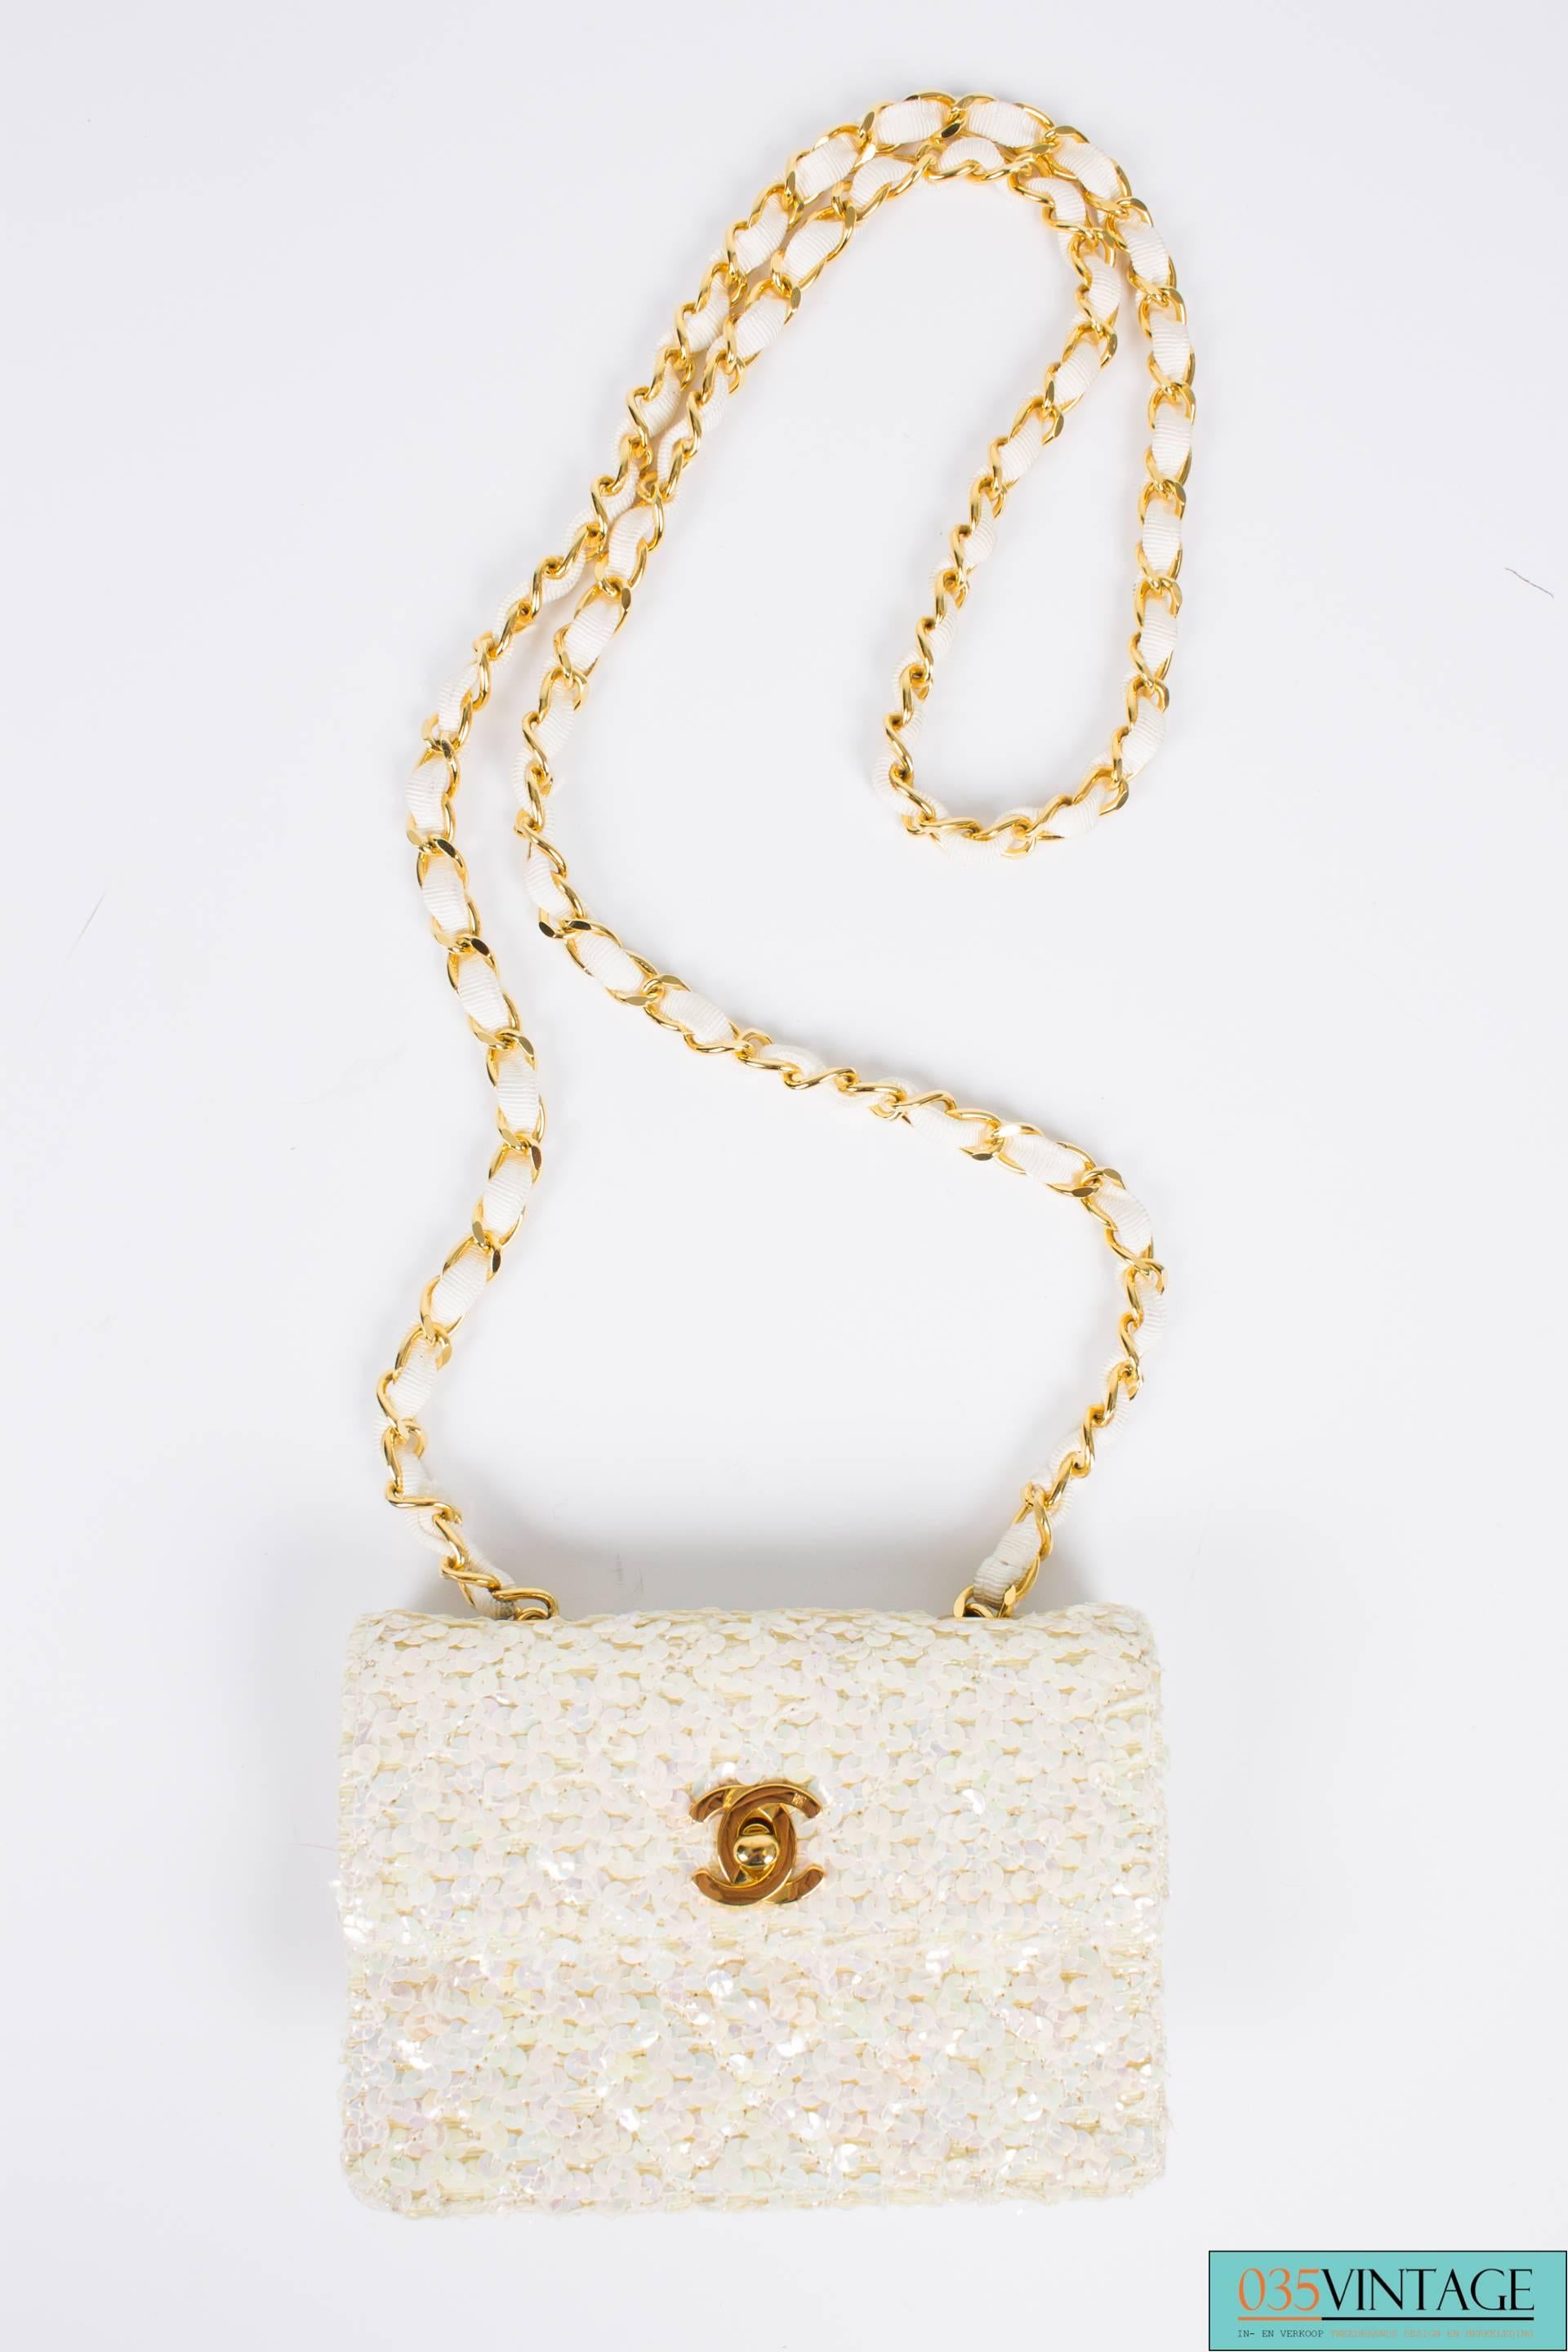 Chanel Iridescent Micro Flap Bag - ivory/sequins/gold 1